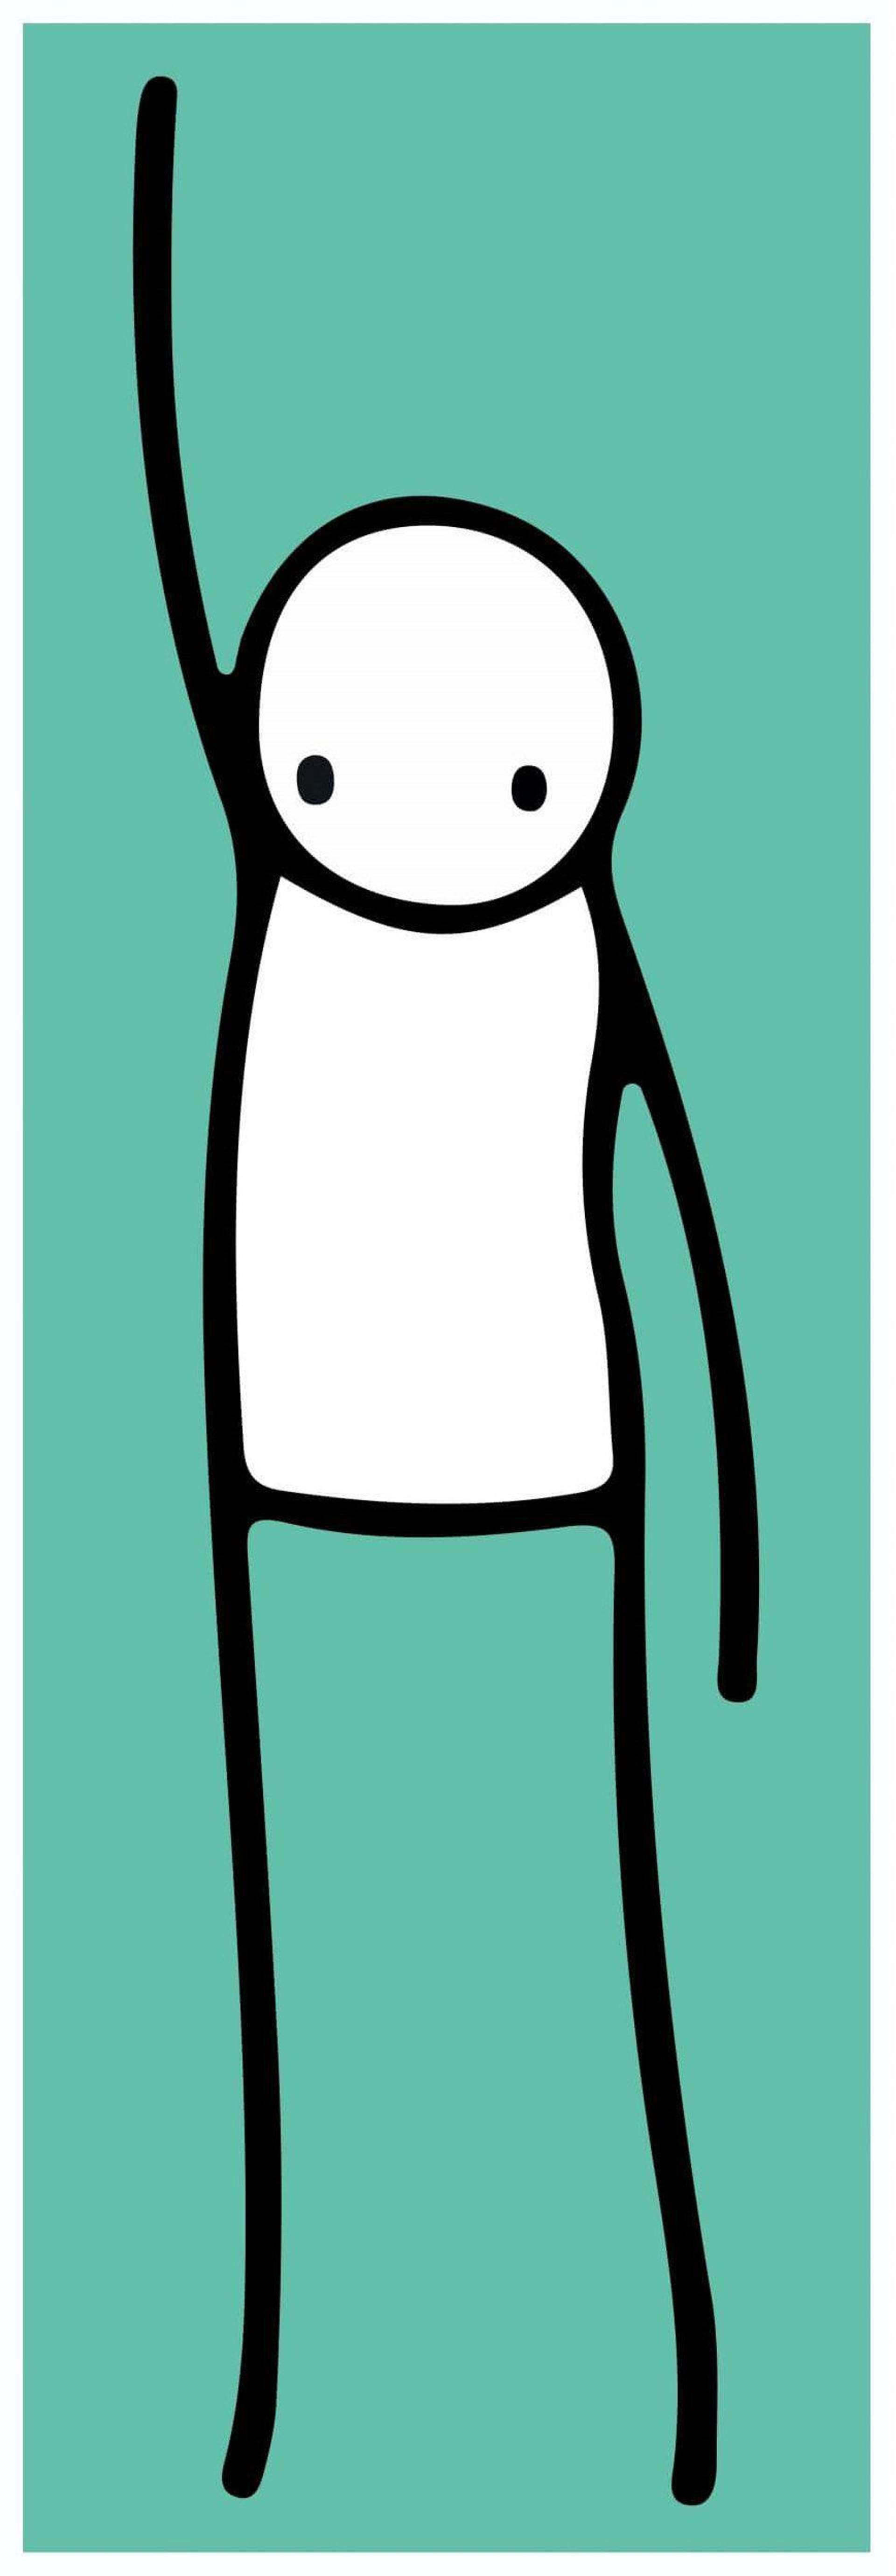 STIK’s Liberty (teal). A screenprint of a stick figure with their arm raised in the air against a teal background. 